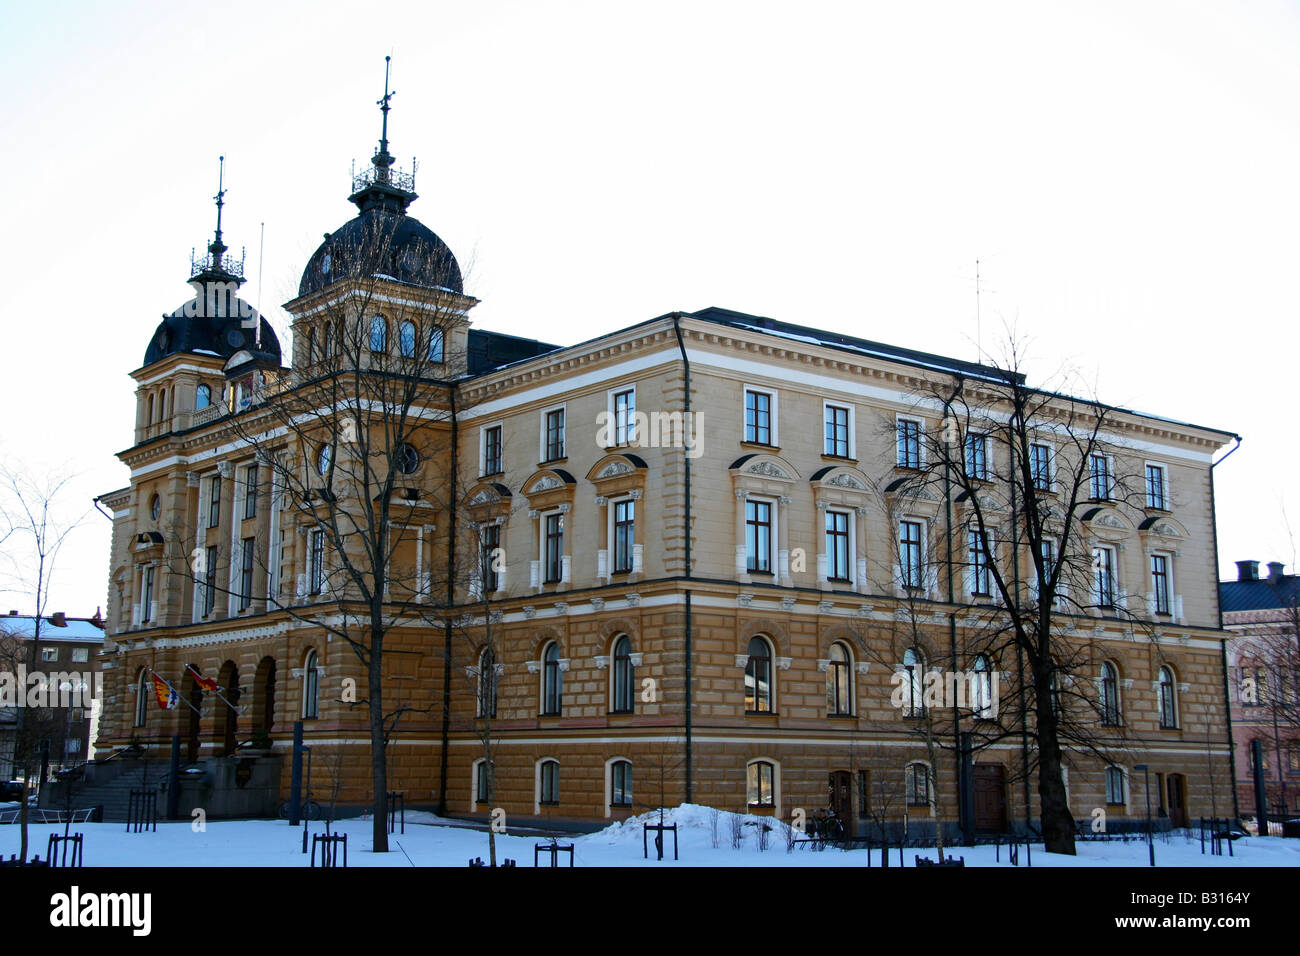 The Oulu city hall or Oulun kaupungintalo in Suomi. Stock Photo